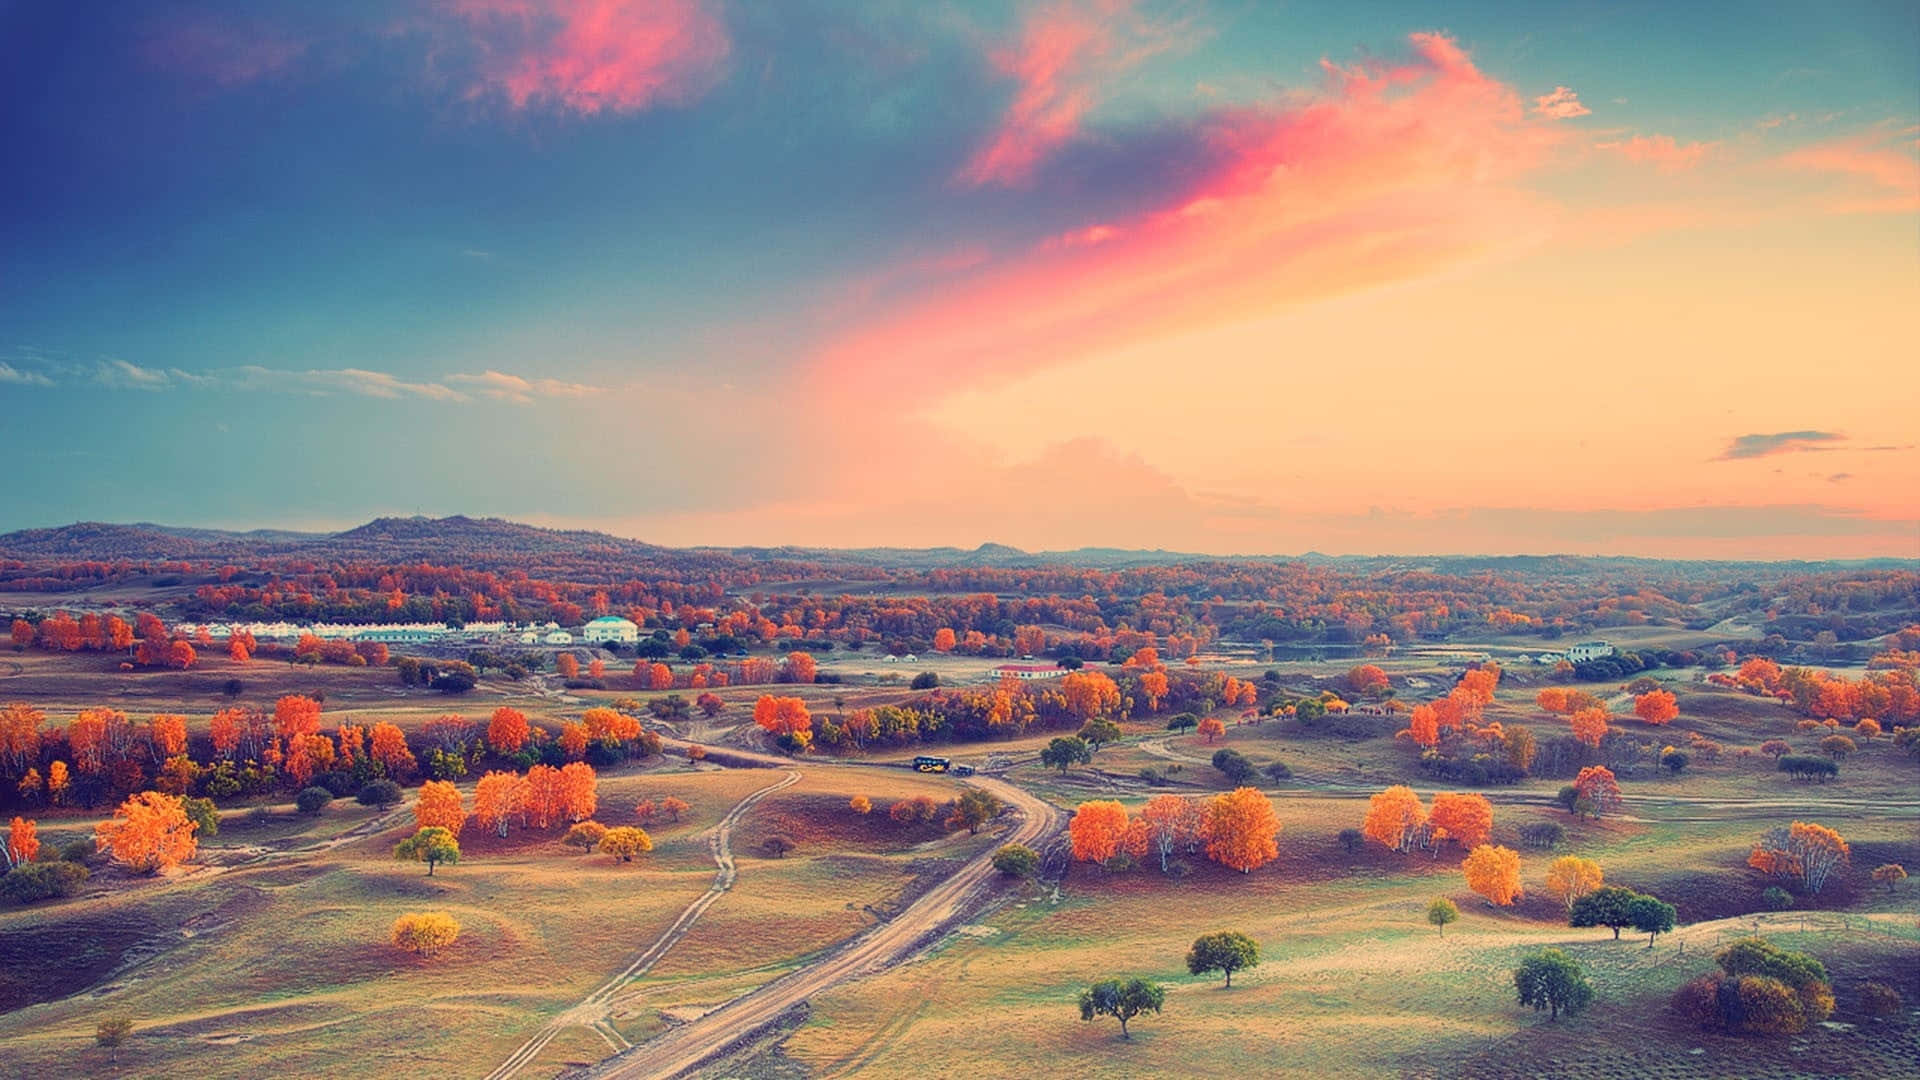 “vibrant Sunset Over A Sea Of Greenery” Background